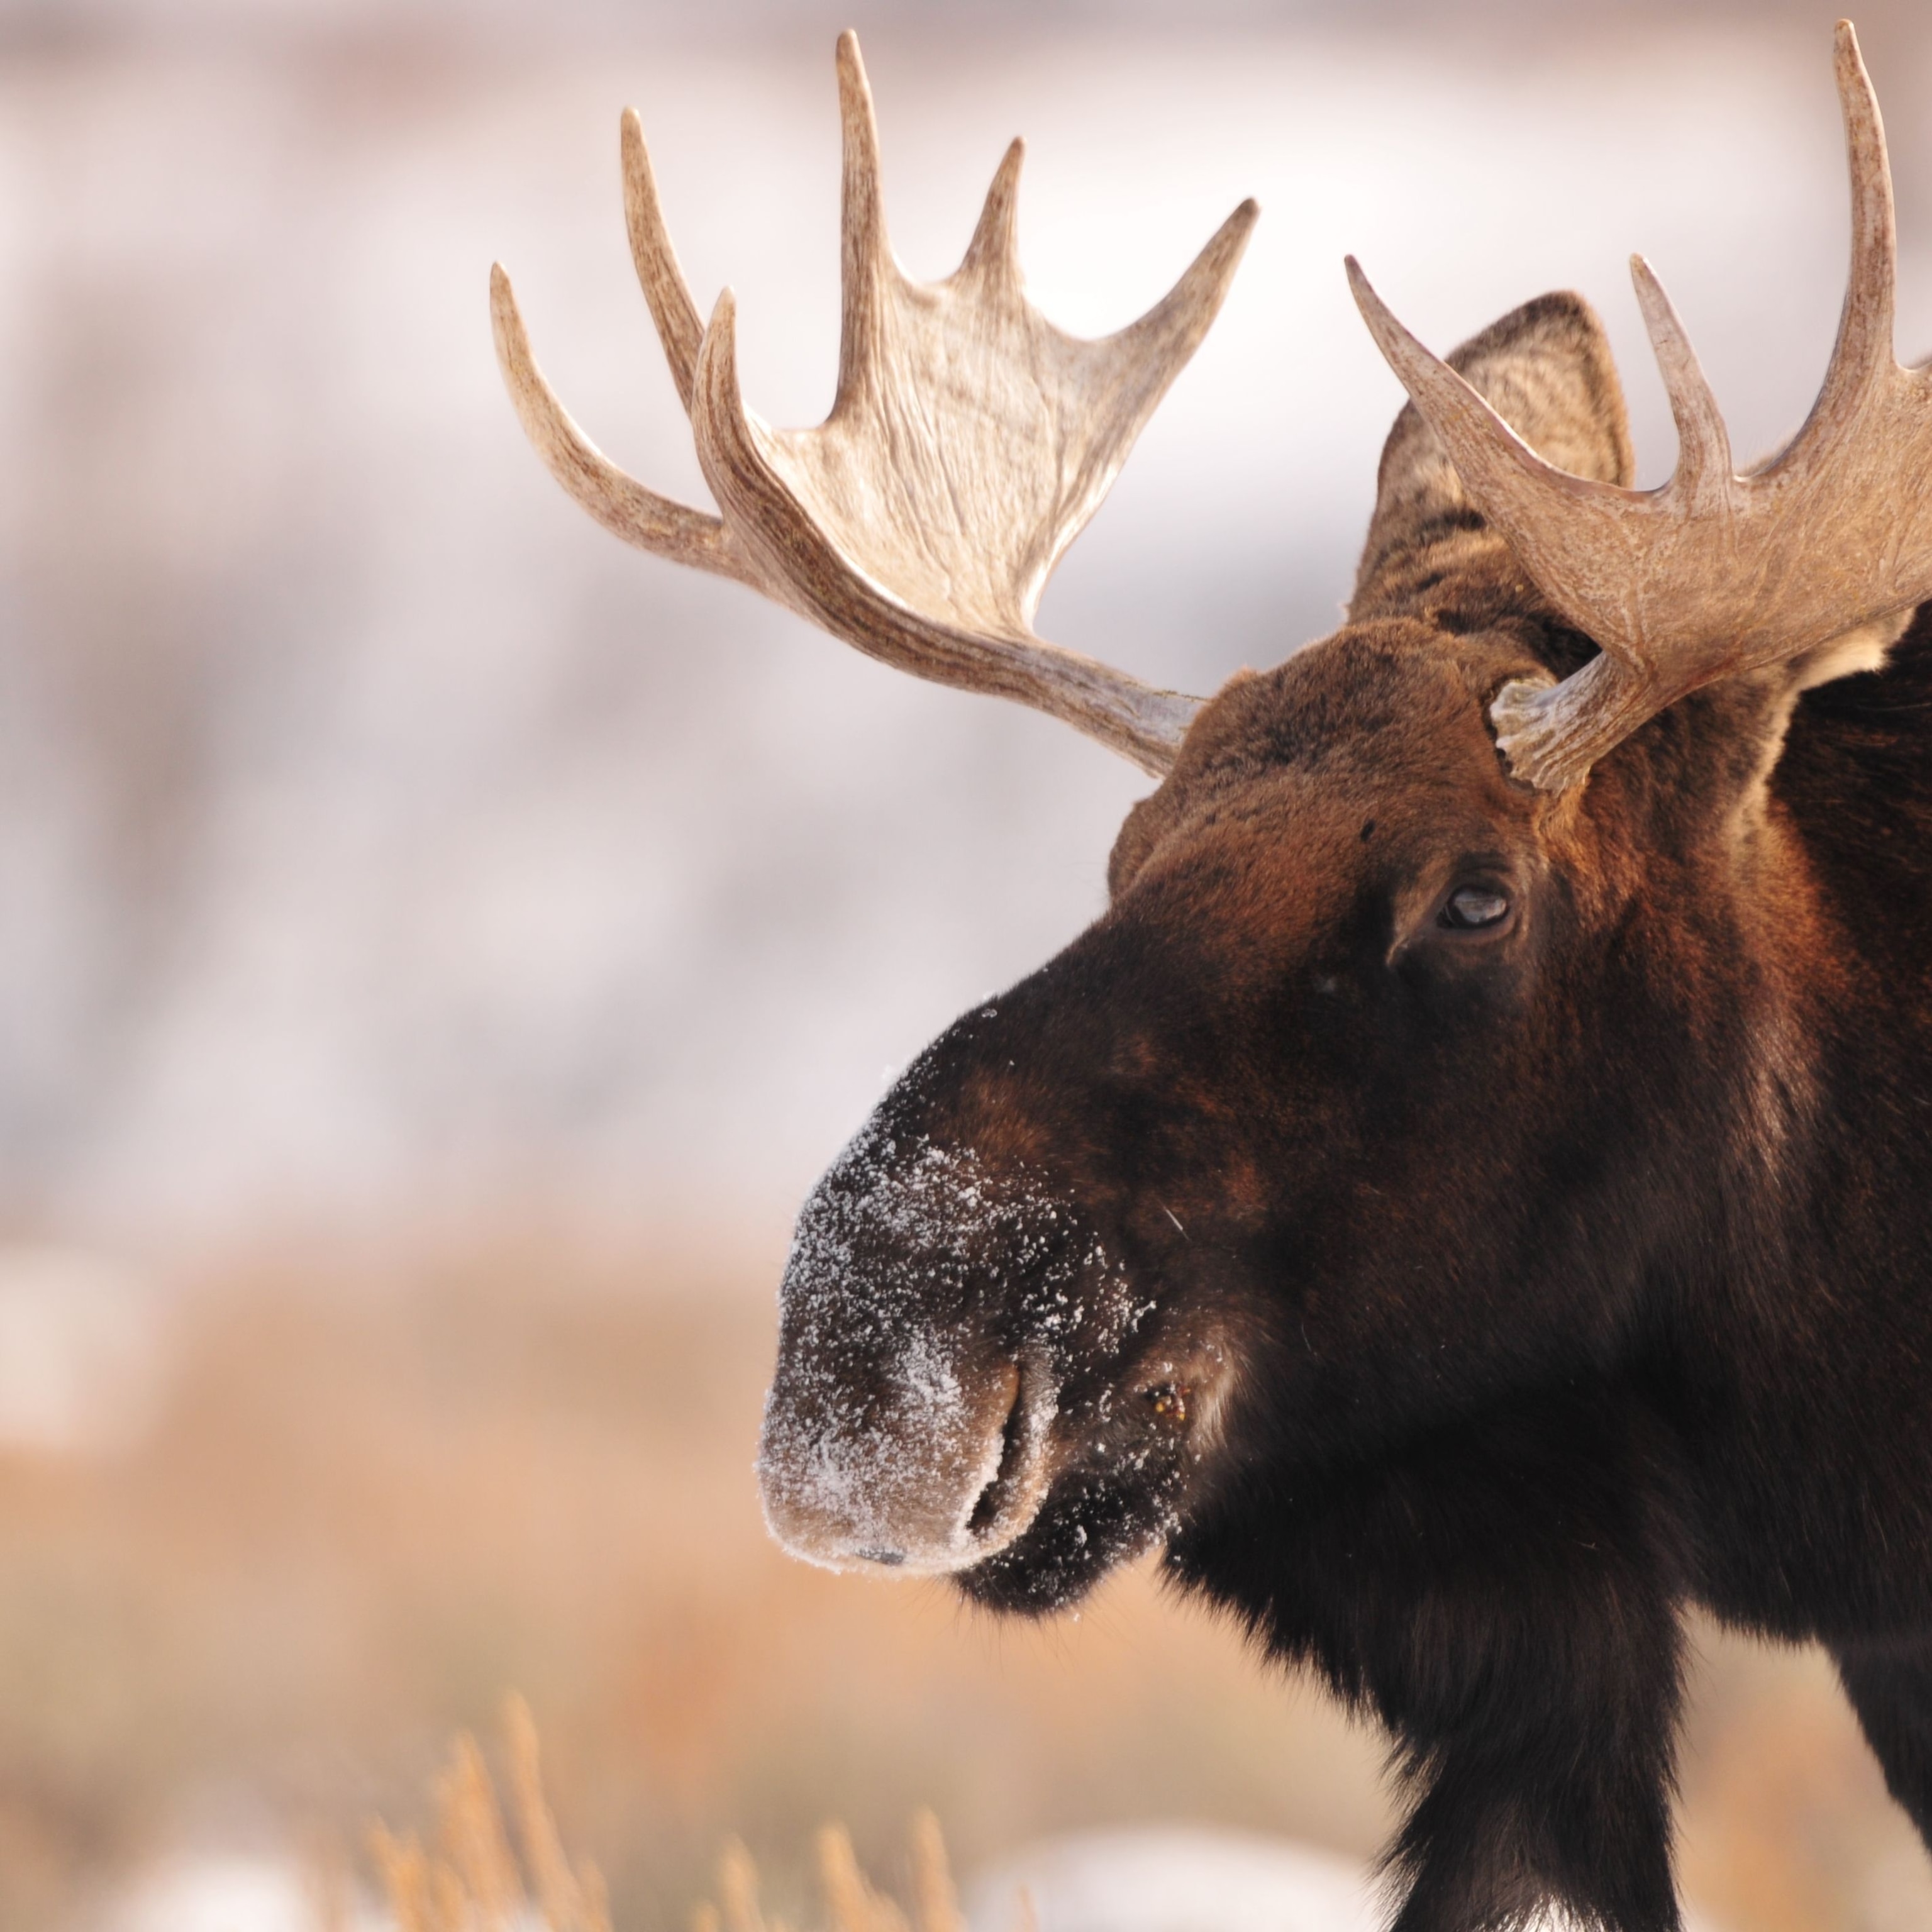 Moose | National Geographic